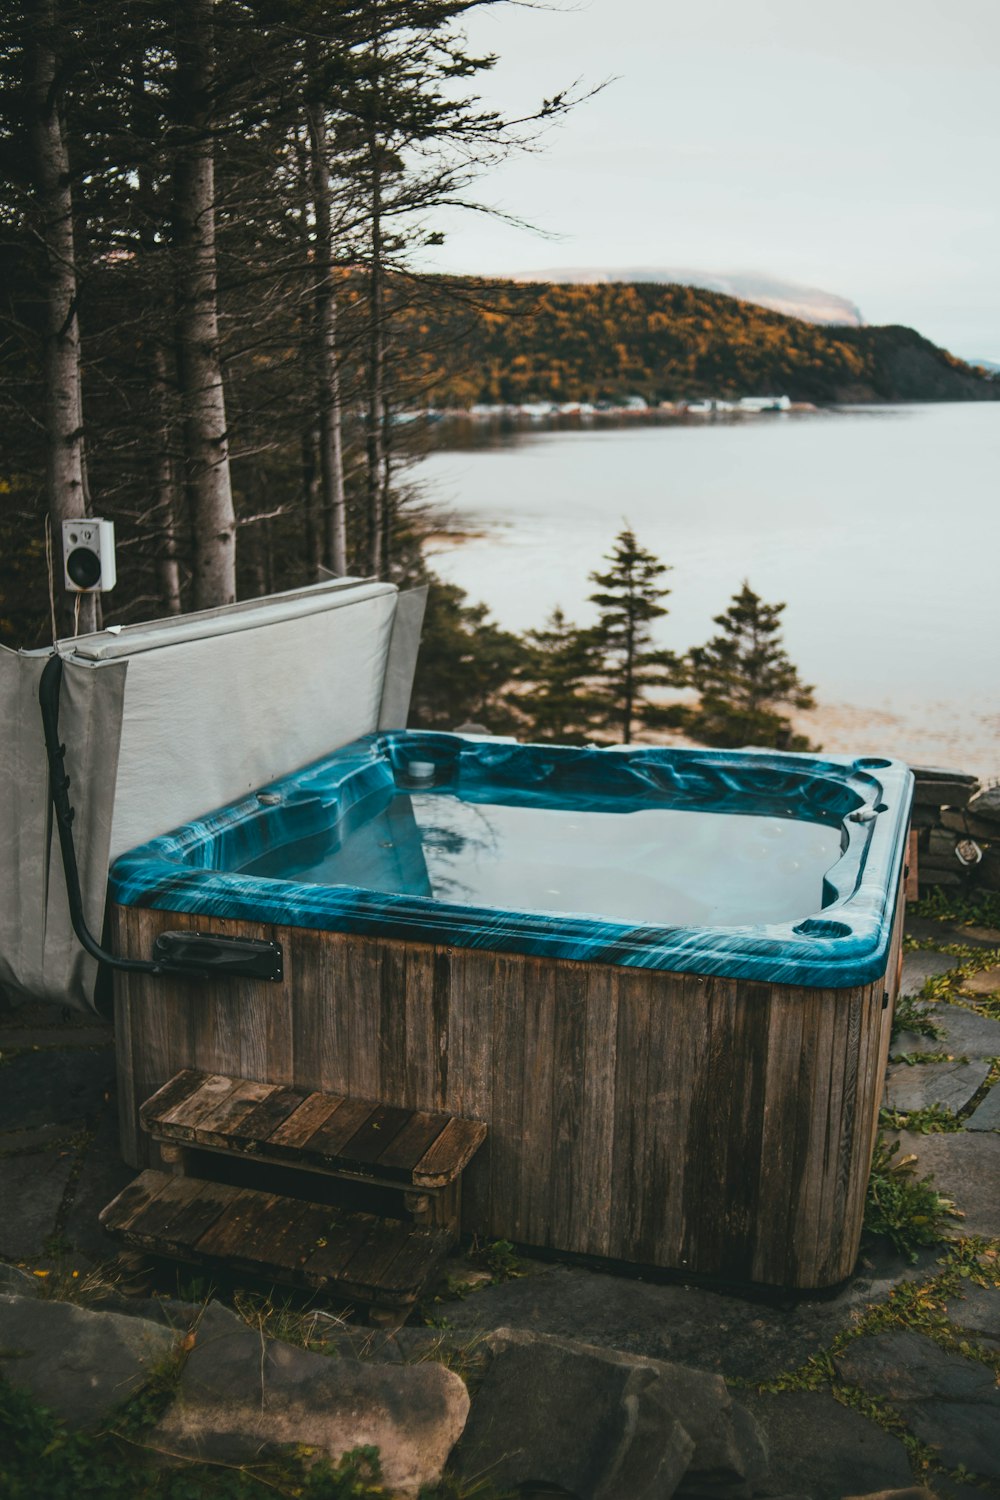 a hot tub sitting next to a body of water